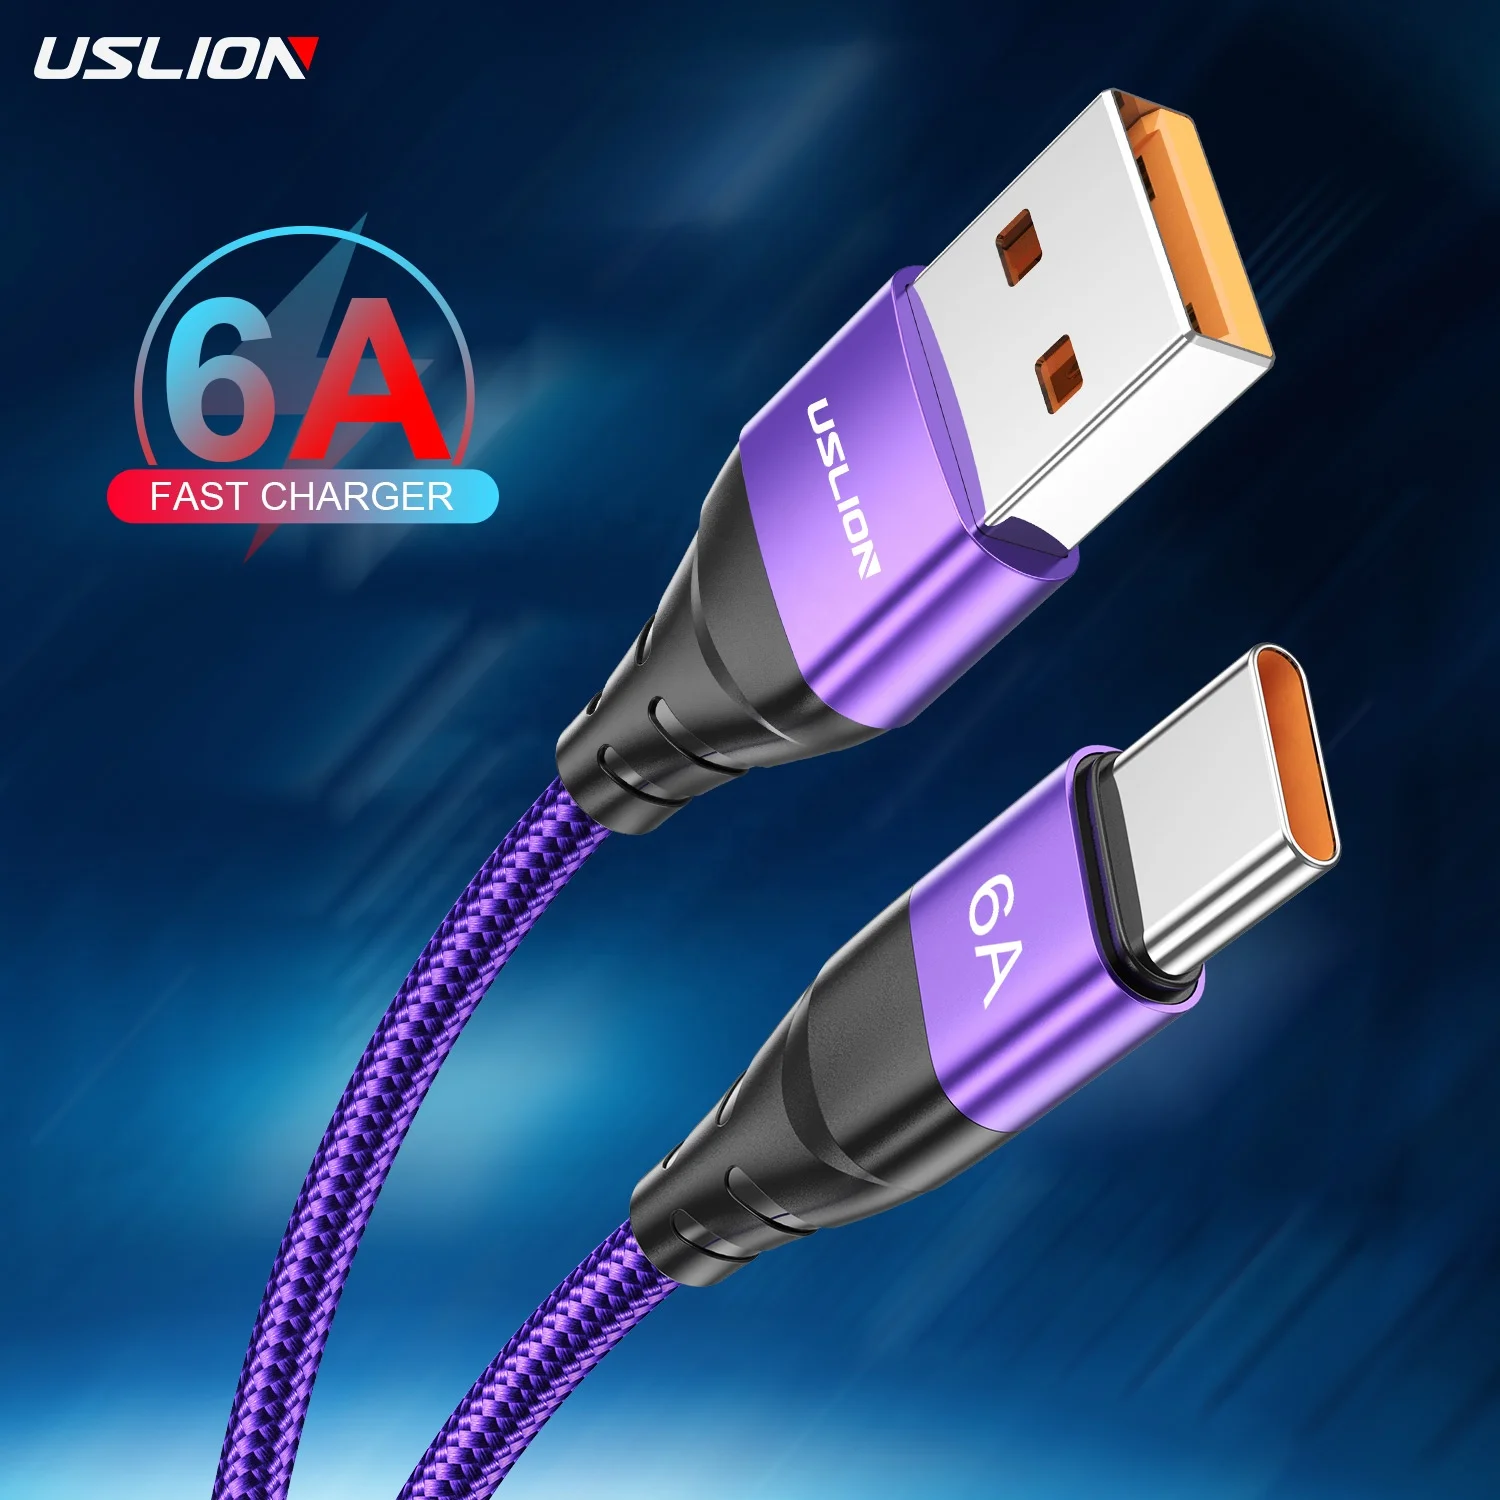 

USLION Amzaon Hot Selling 2M 6A 66W USB Type C Cable Charger Mobile Phone Fast Charge USB Cable Type C Data Cables for Huawei, Black,red,purple